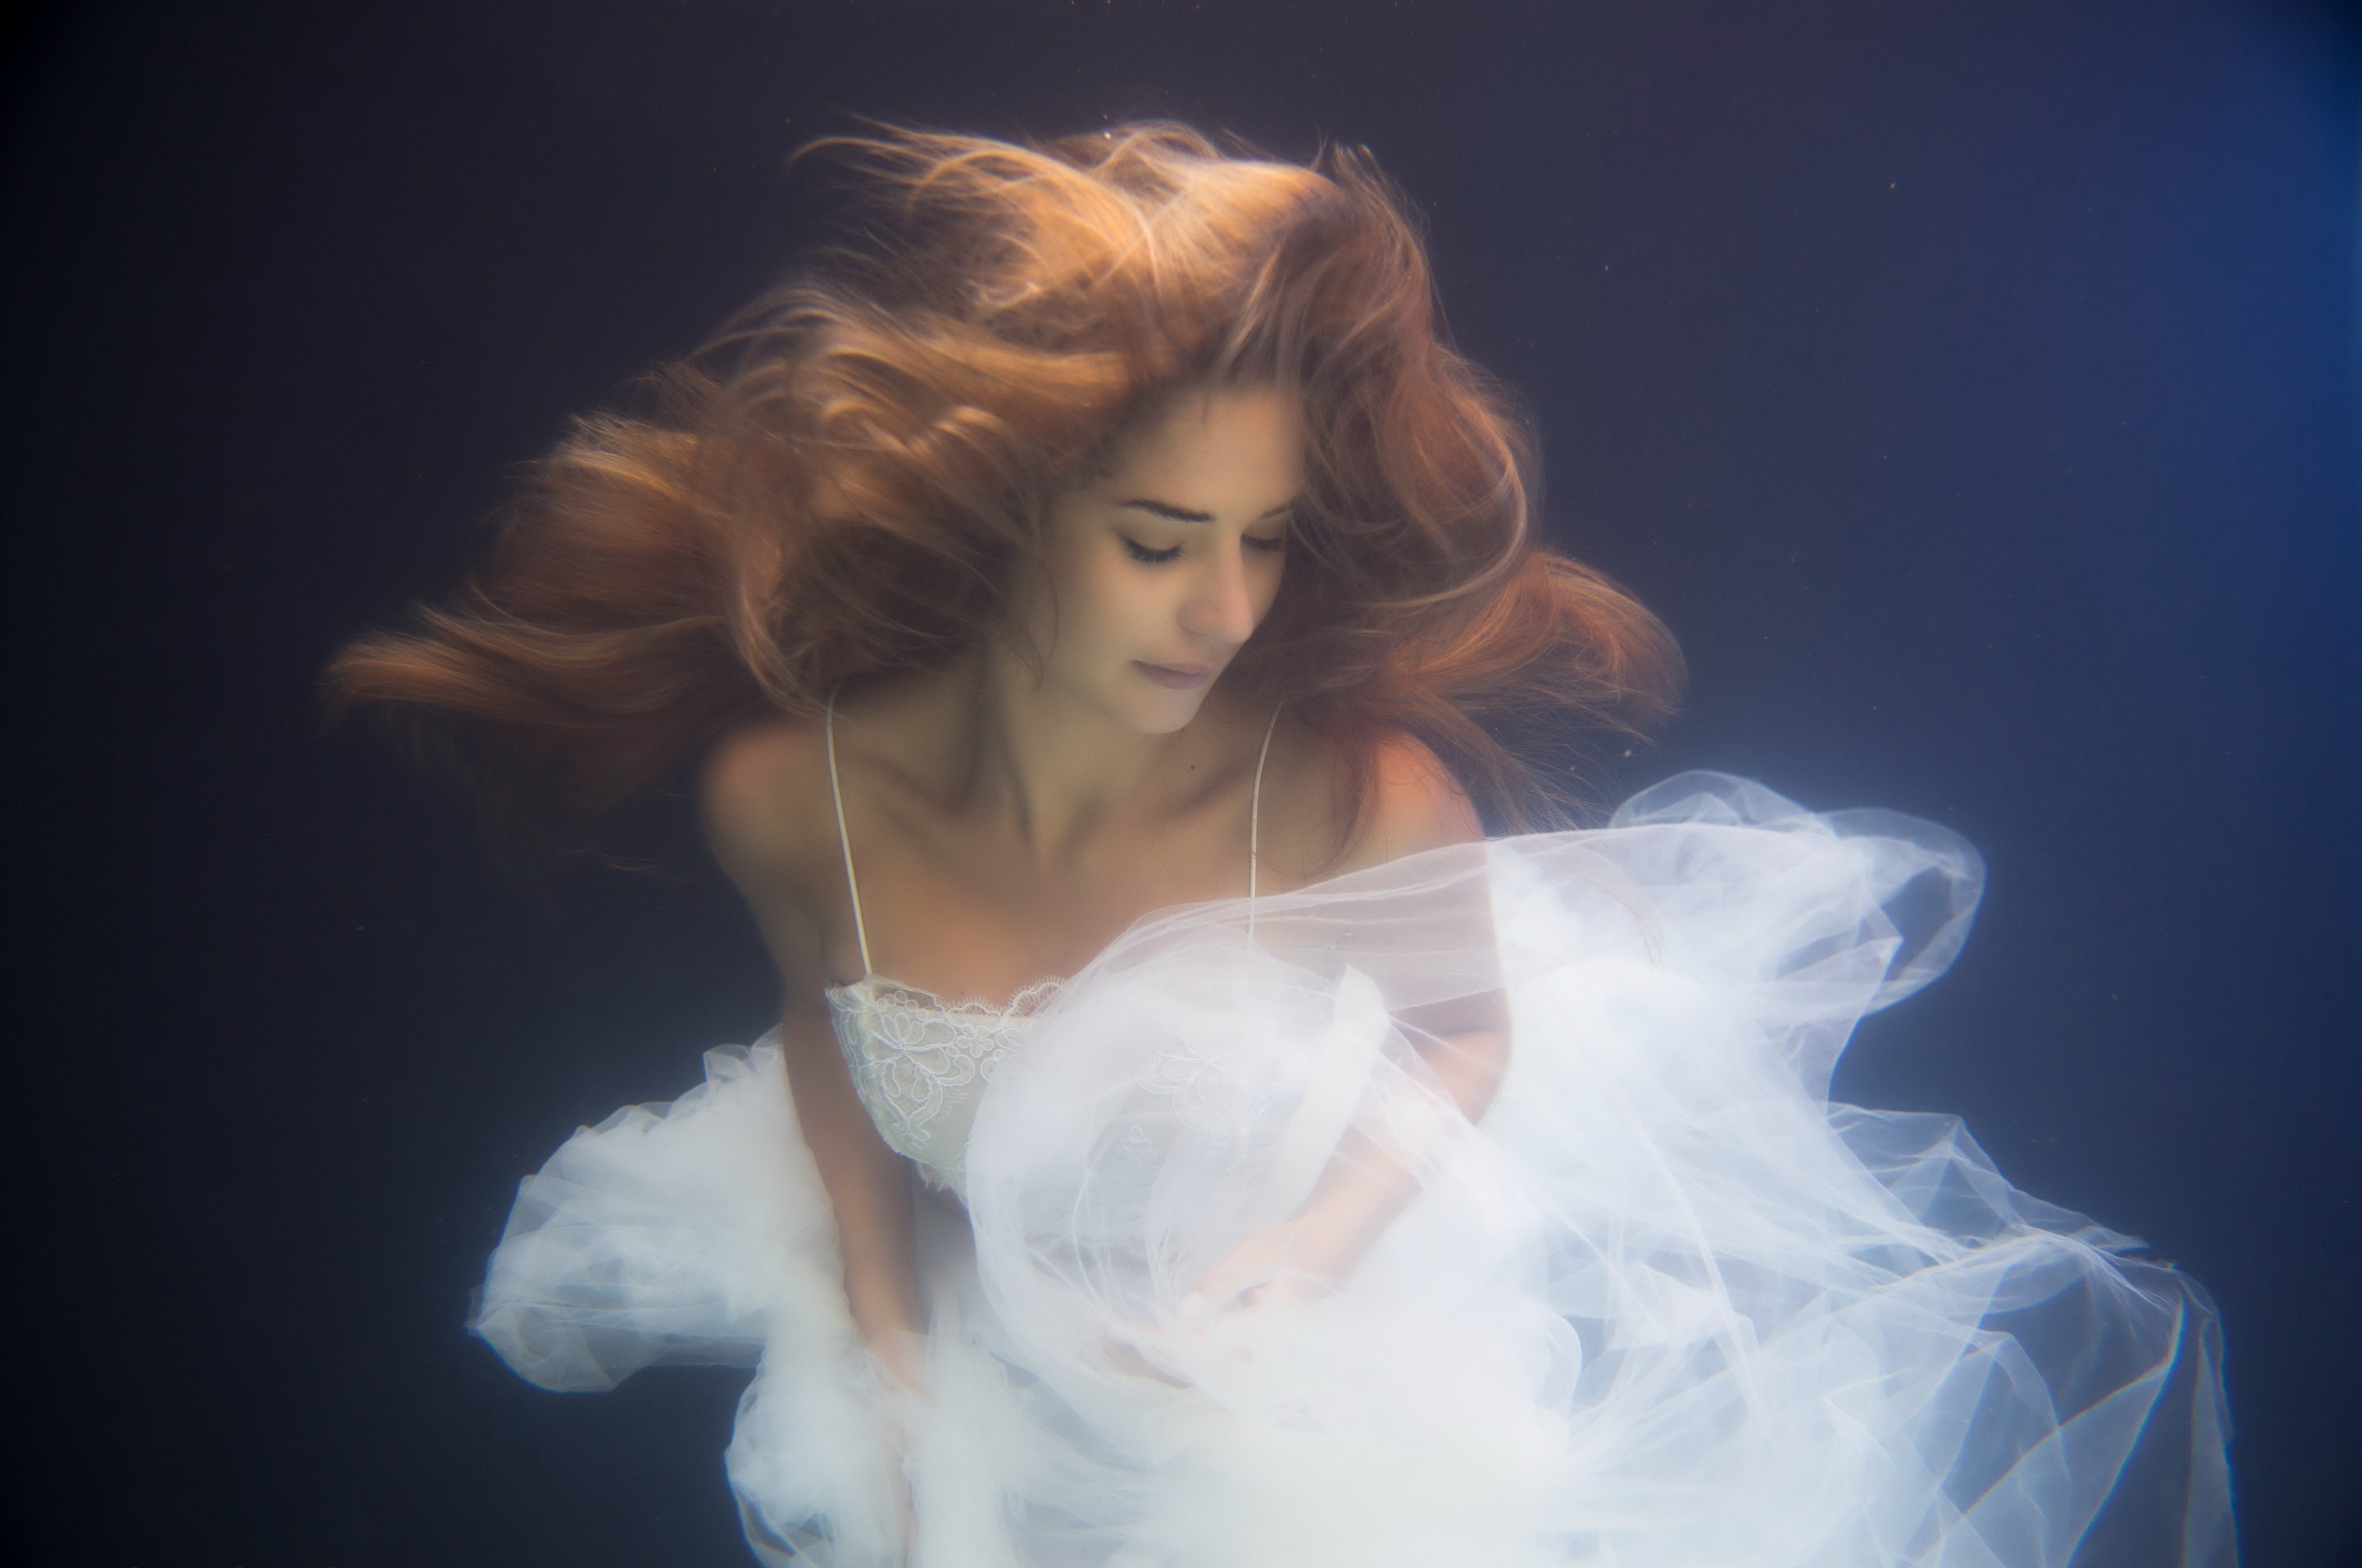 Women Underwater Hd Wallpapers Desktop And Mobile Images And Photos